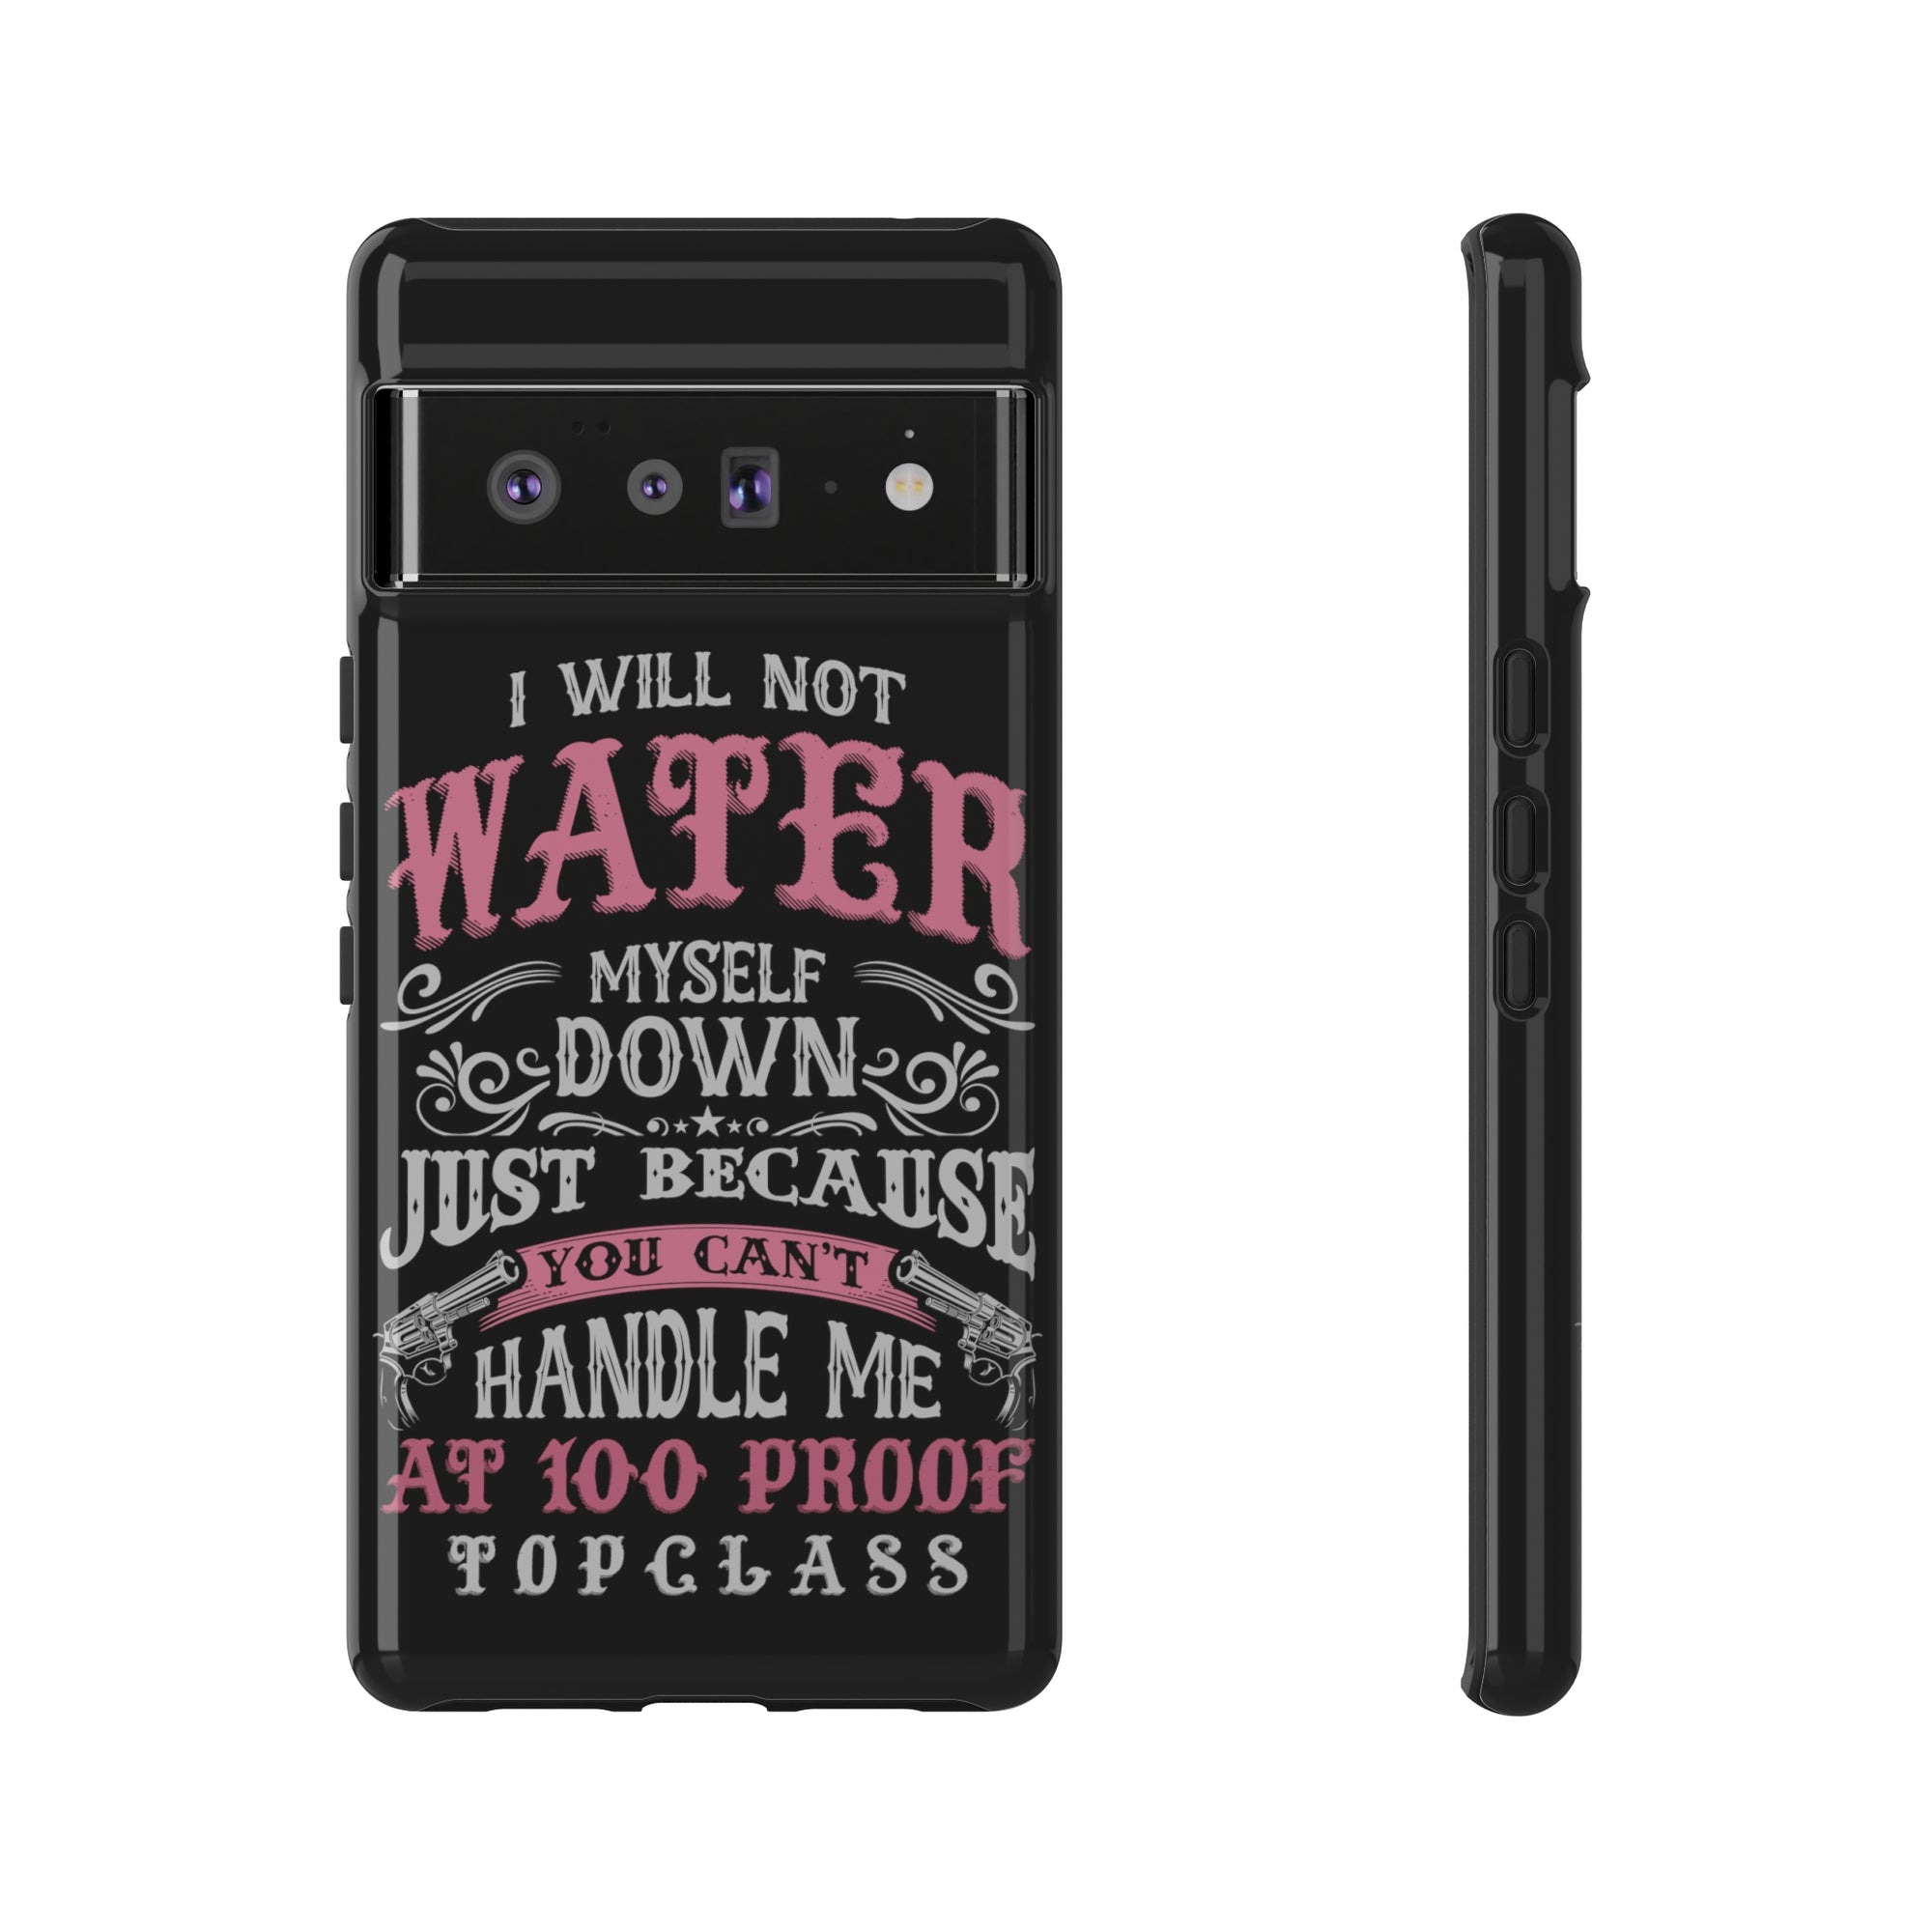 Topclass Tough Phone Cases 100 proof